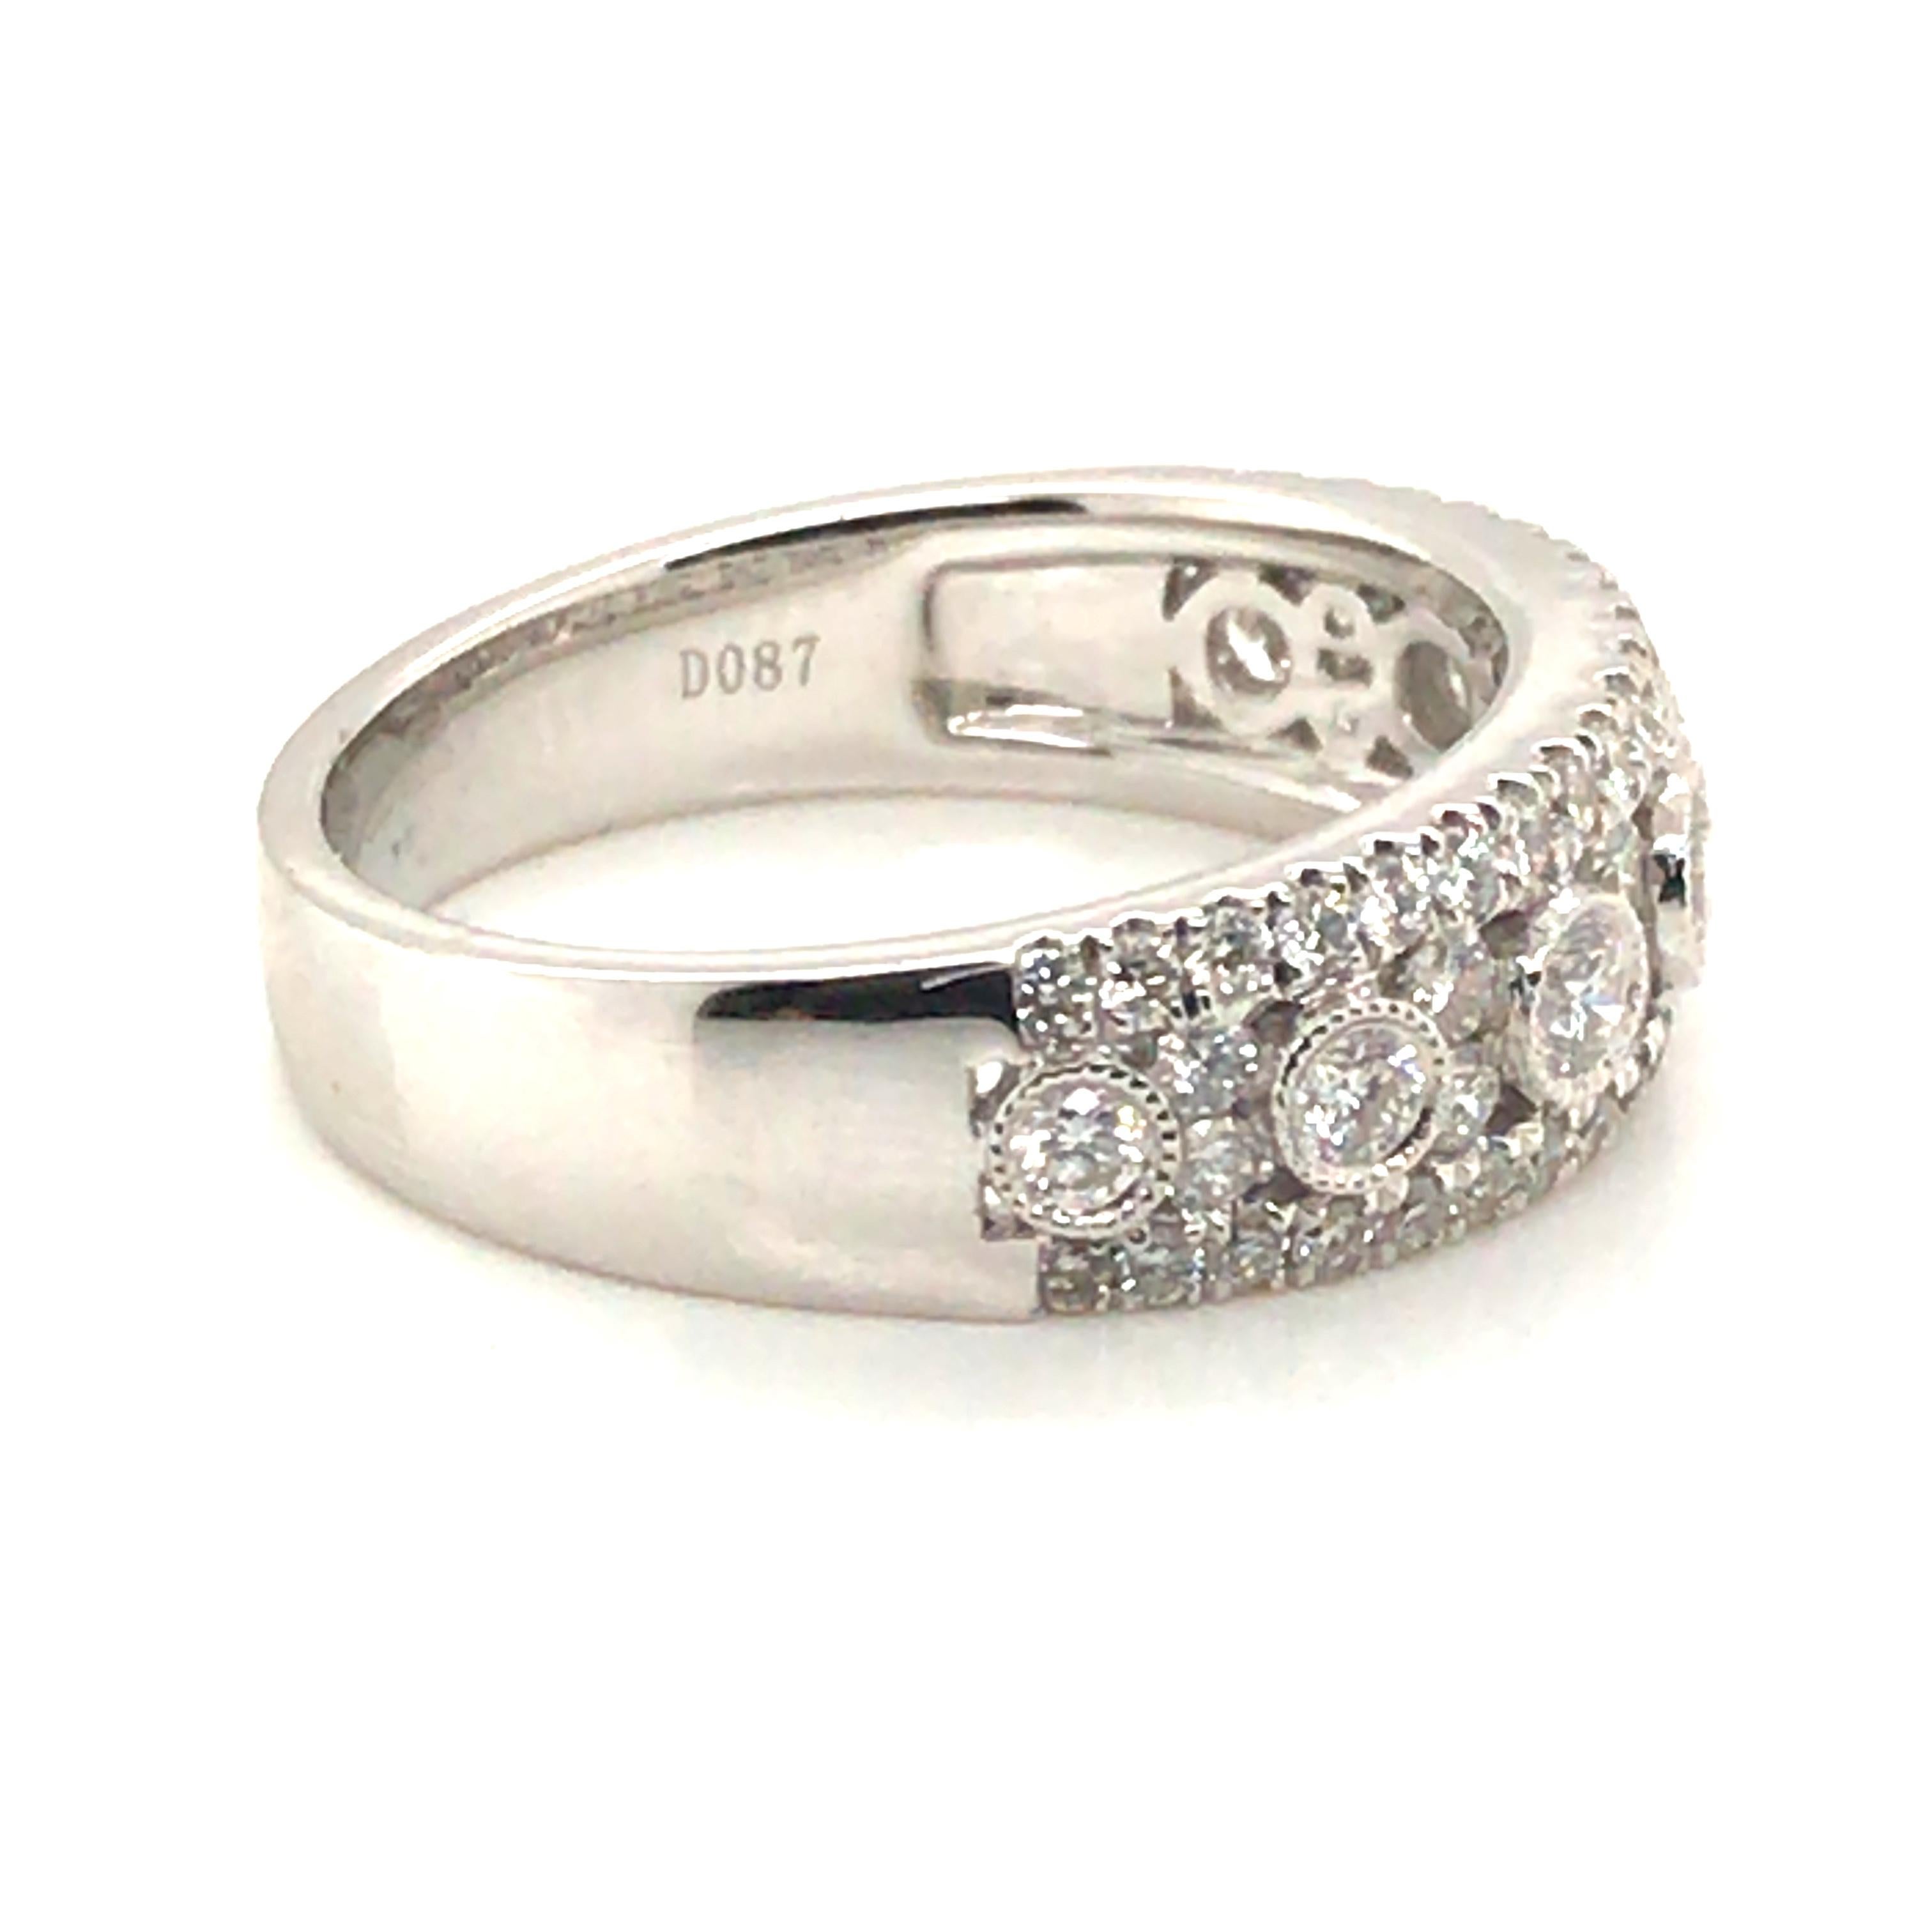 0.87 Carat Fashion Diamond Band Ring with 14 Karat White Gold In New Condition For Sale In New York, NY